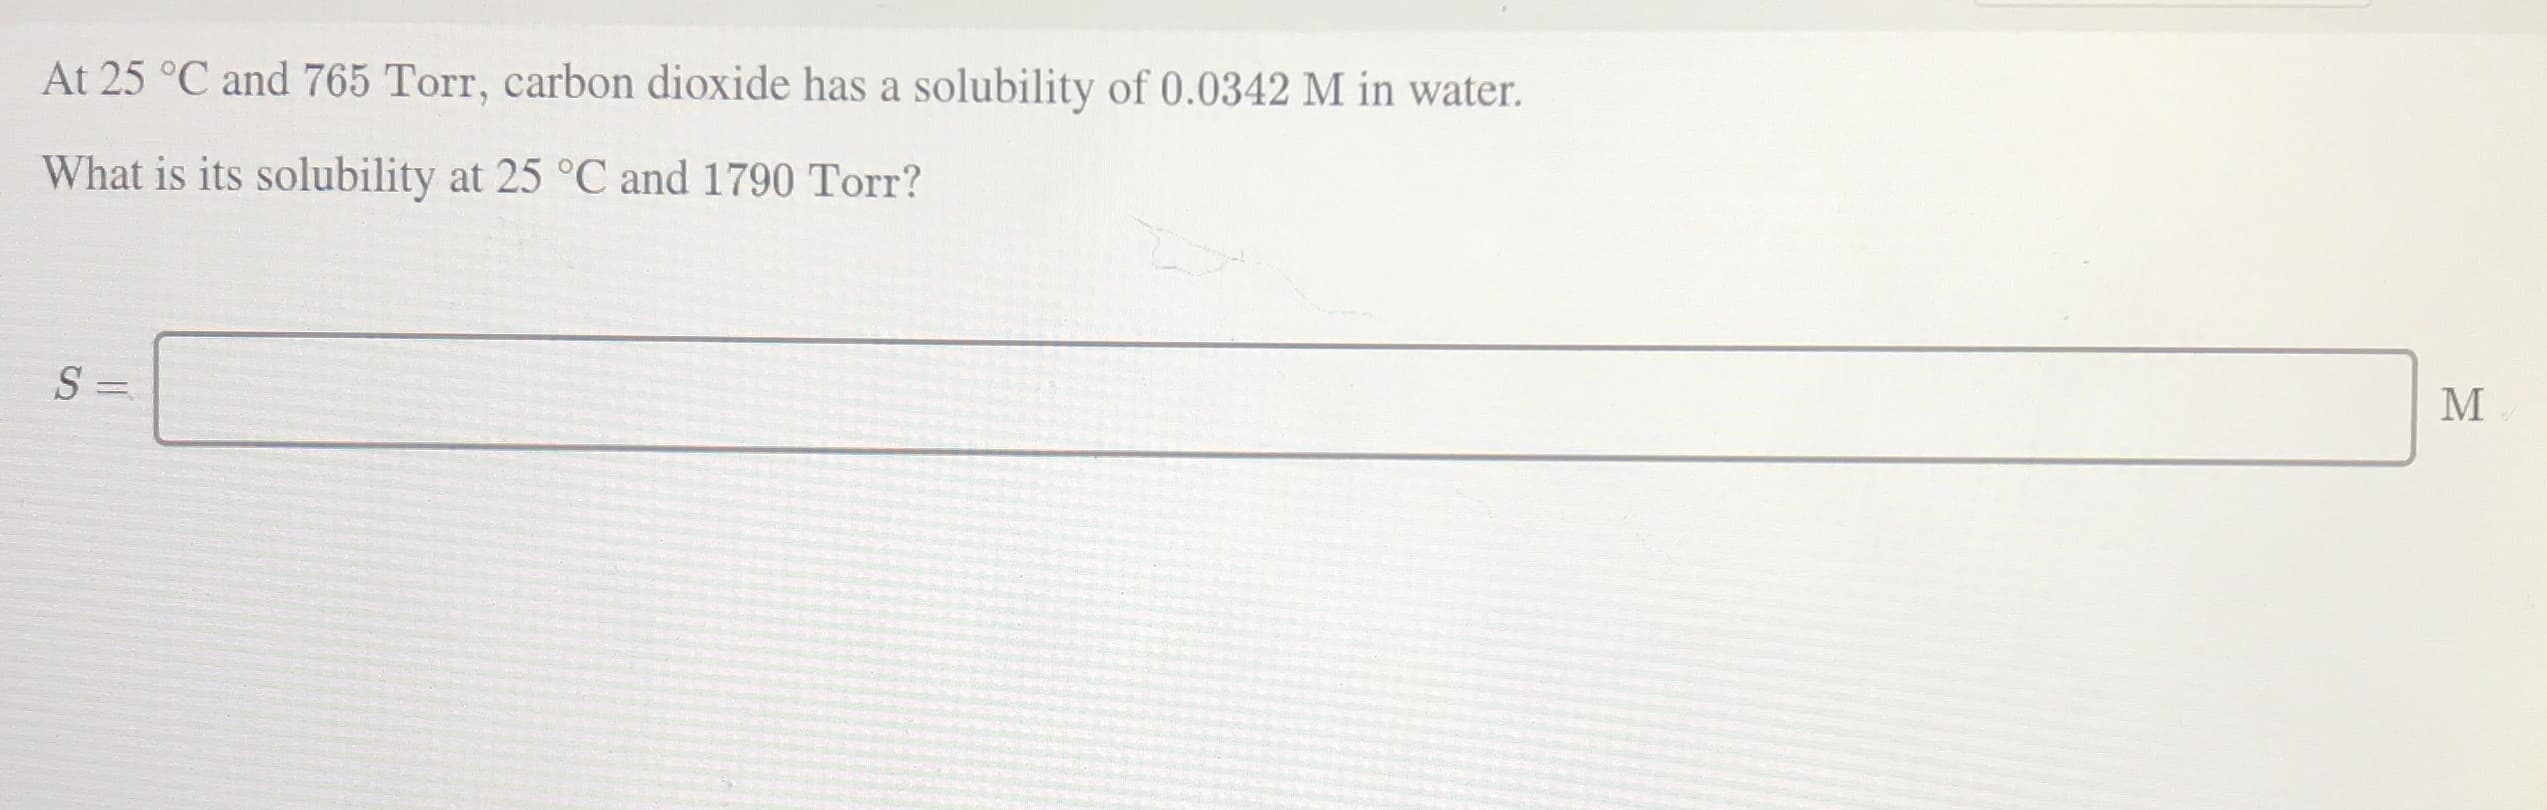 At 25 °C and 765 Torr, carbon dioxide has a solubility of 0.0342 M in water.
What is its solubility at 25 °C and 1790 Torr?
